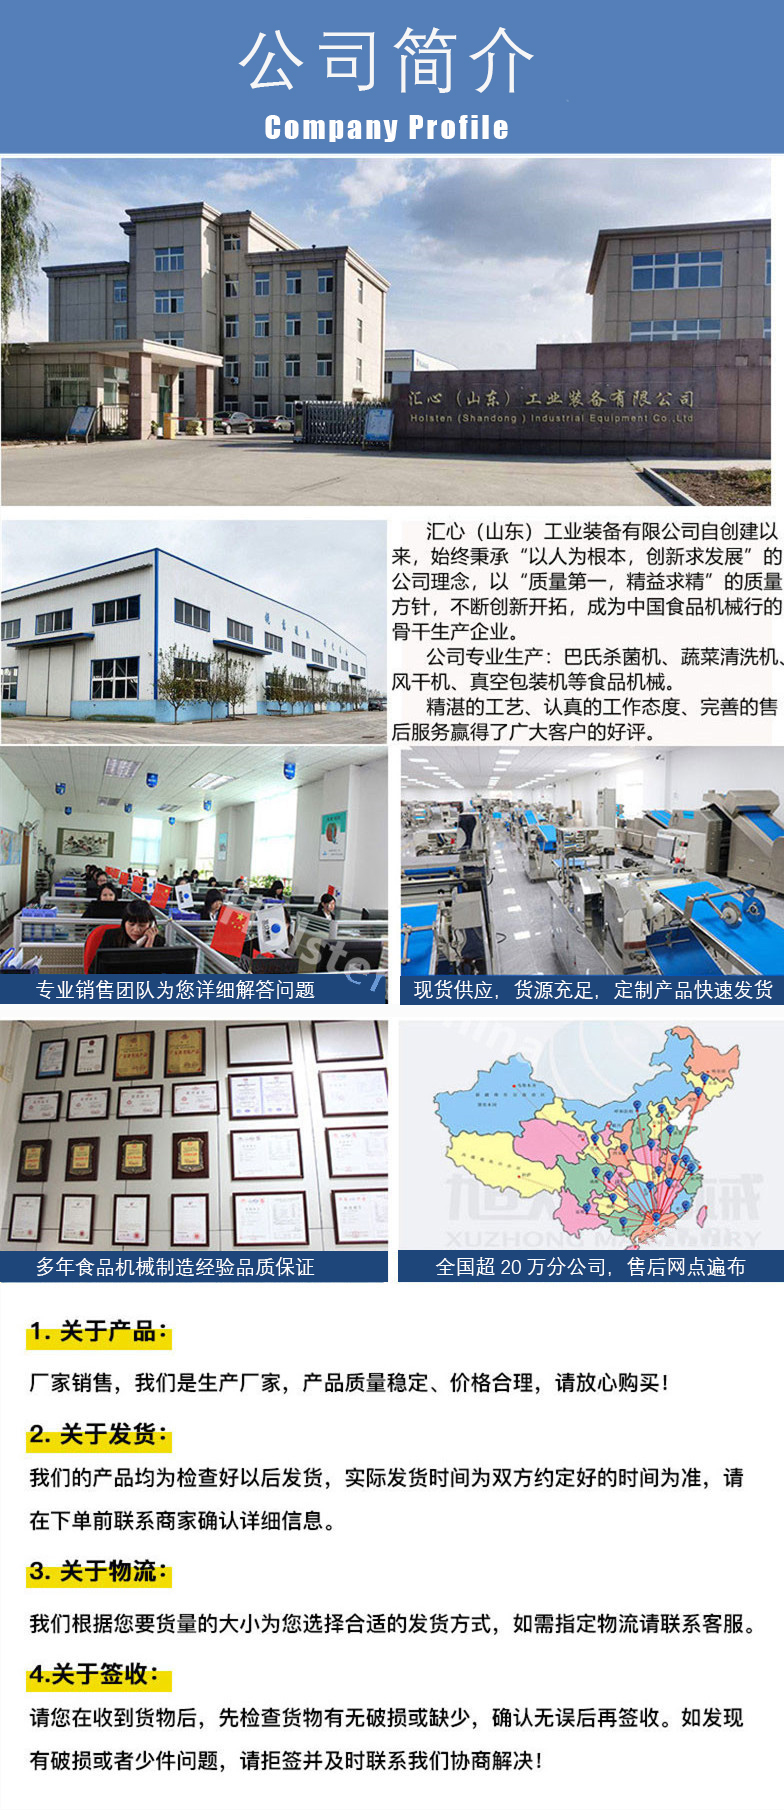 Used bubble cleaning equipment, surfing type, multifunctional cleaning, spray type, convenient operation, soaking and desalination